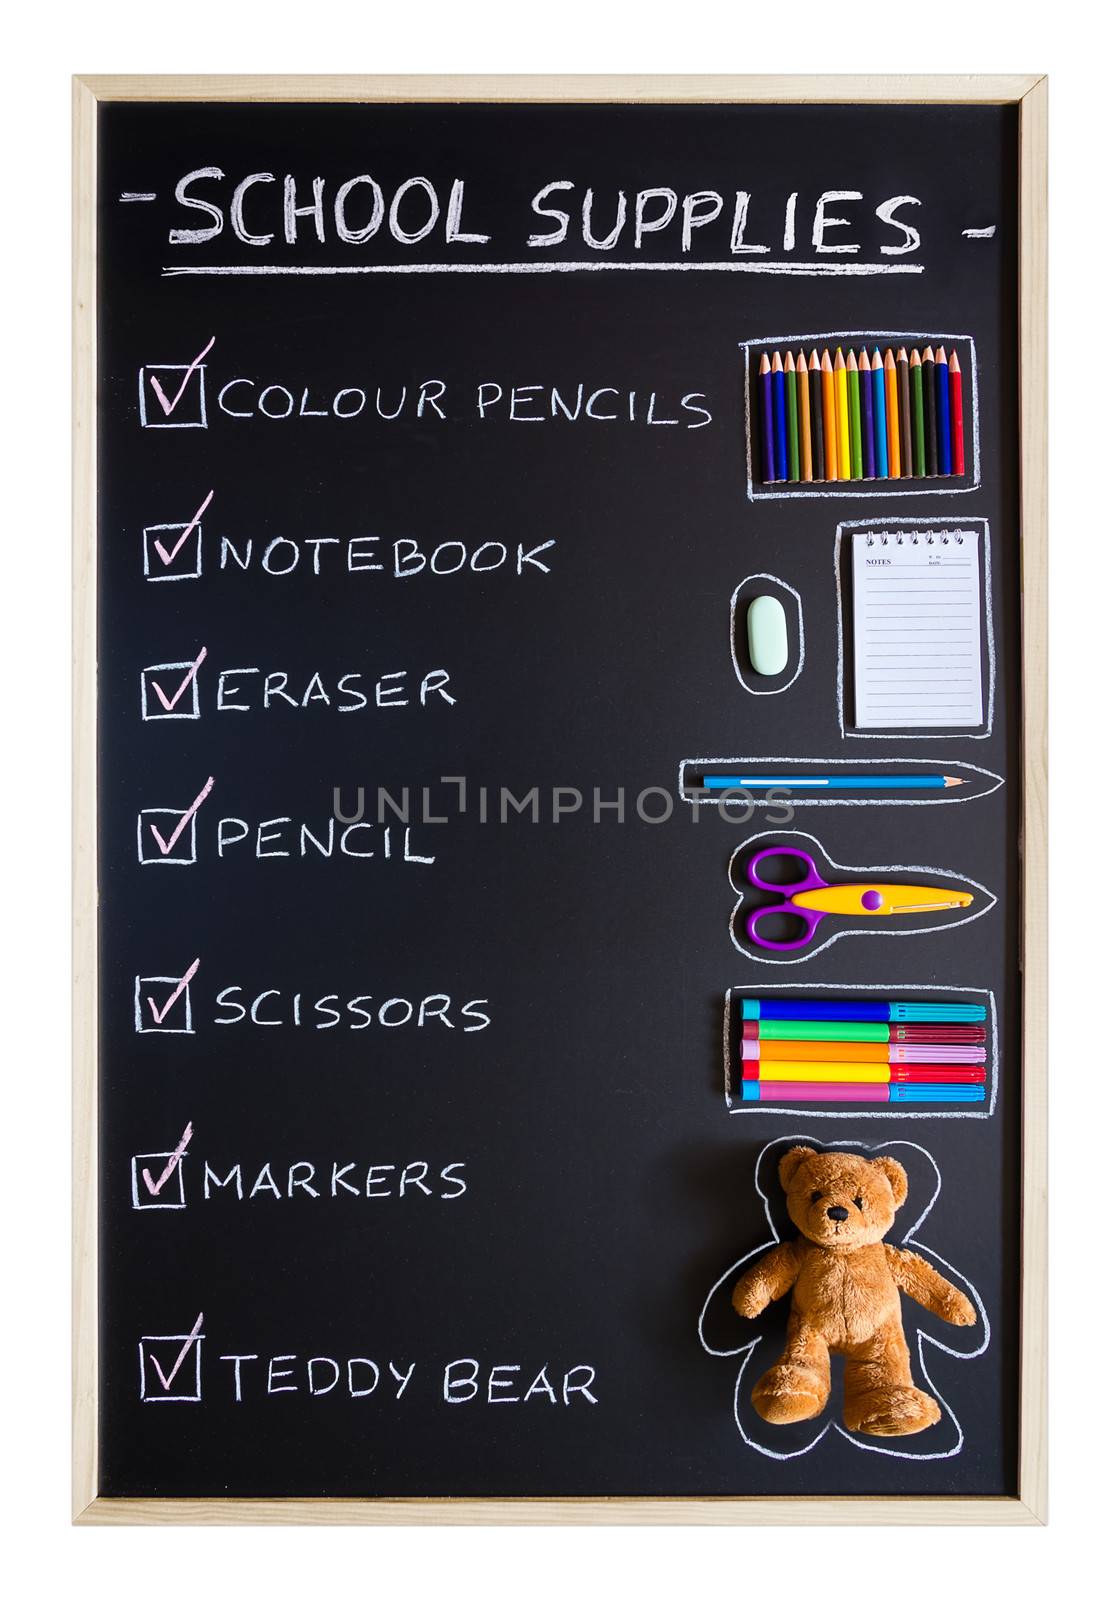 School supplies over blackboard background by doble.d